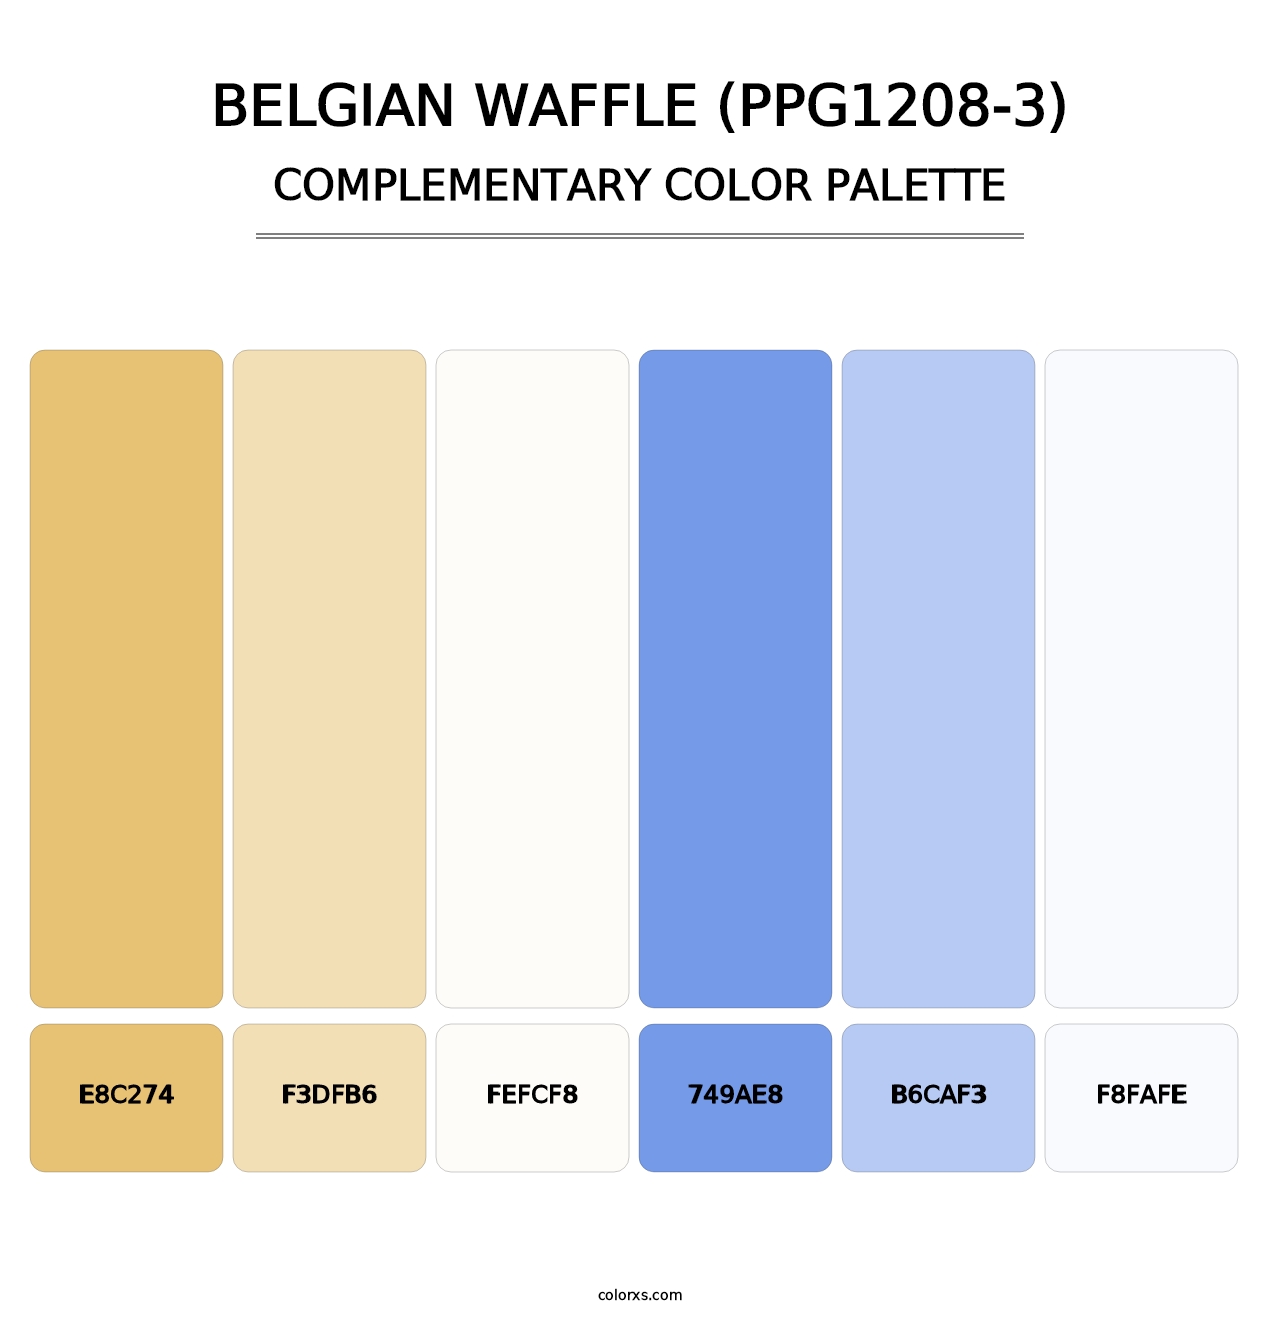 Belgian Waffle (PPG1208-3) - Complementary Color Palette